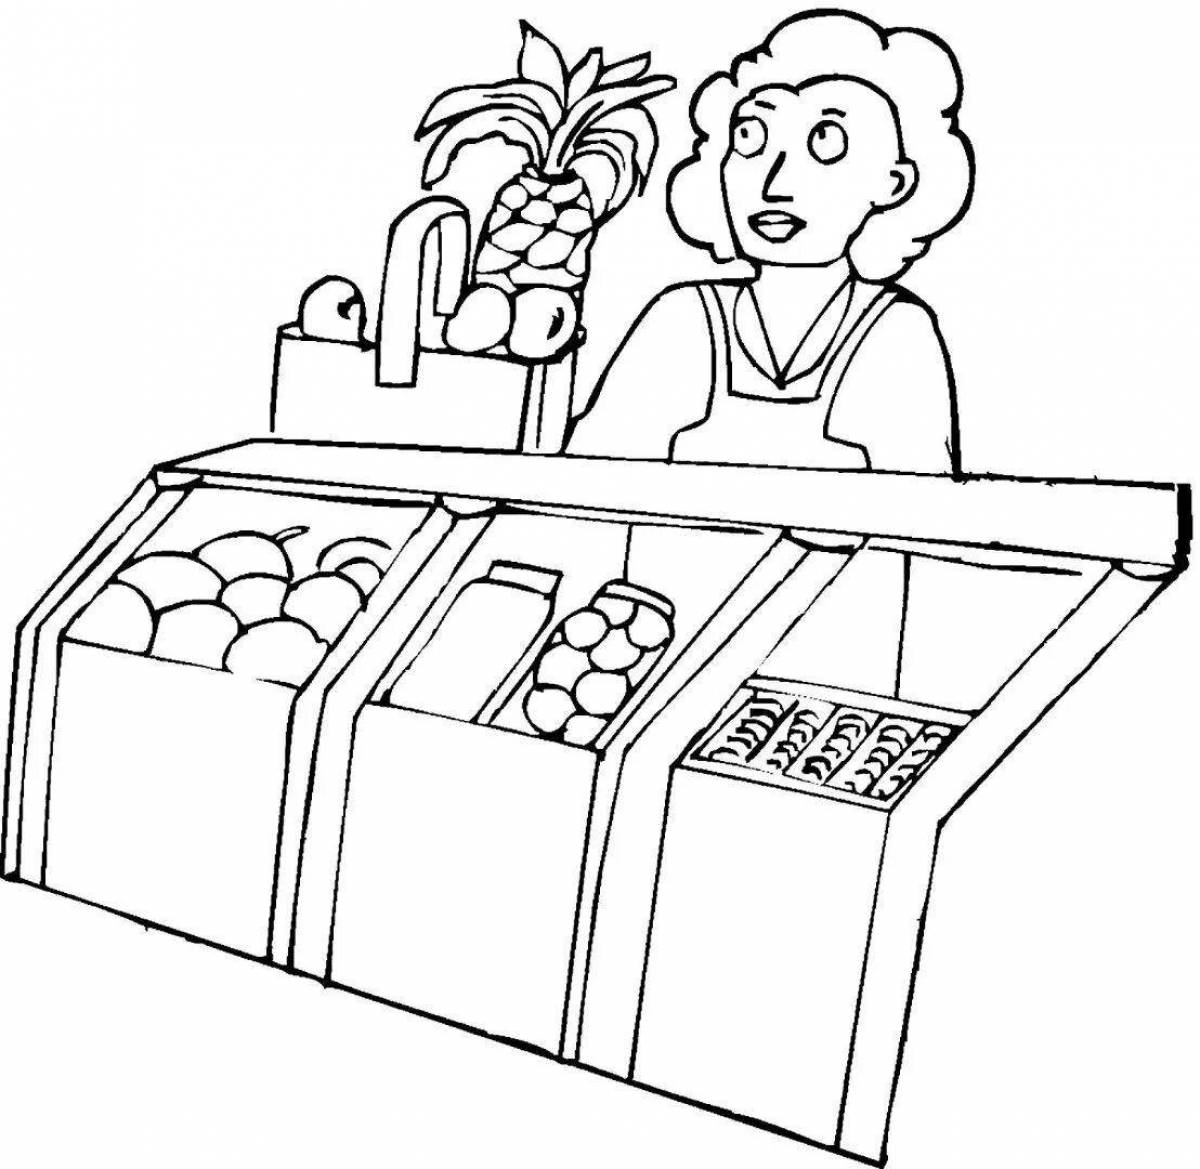 Colorful grocery store coloring pages for kids